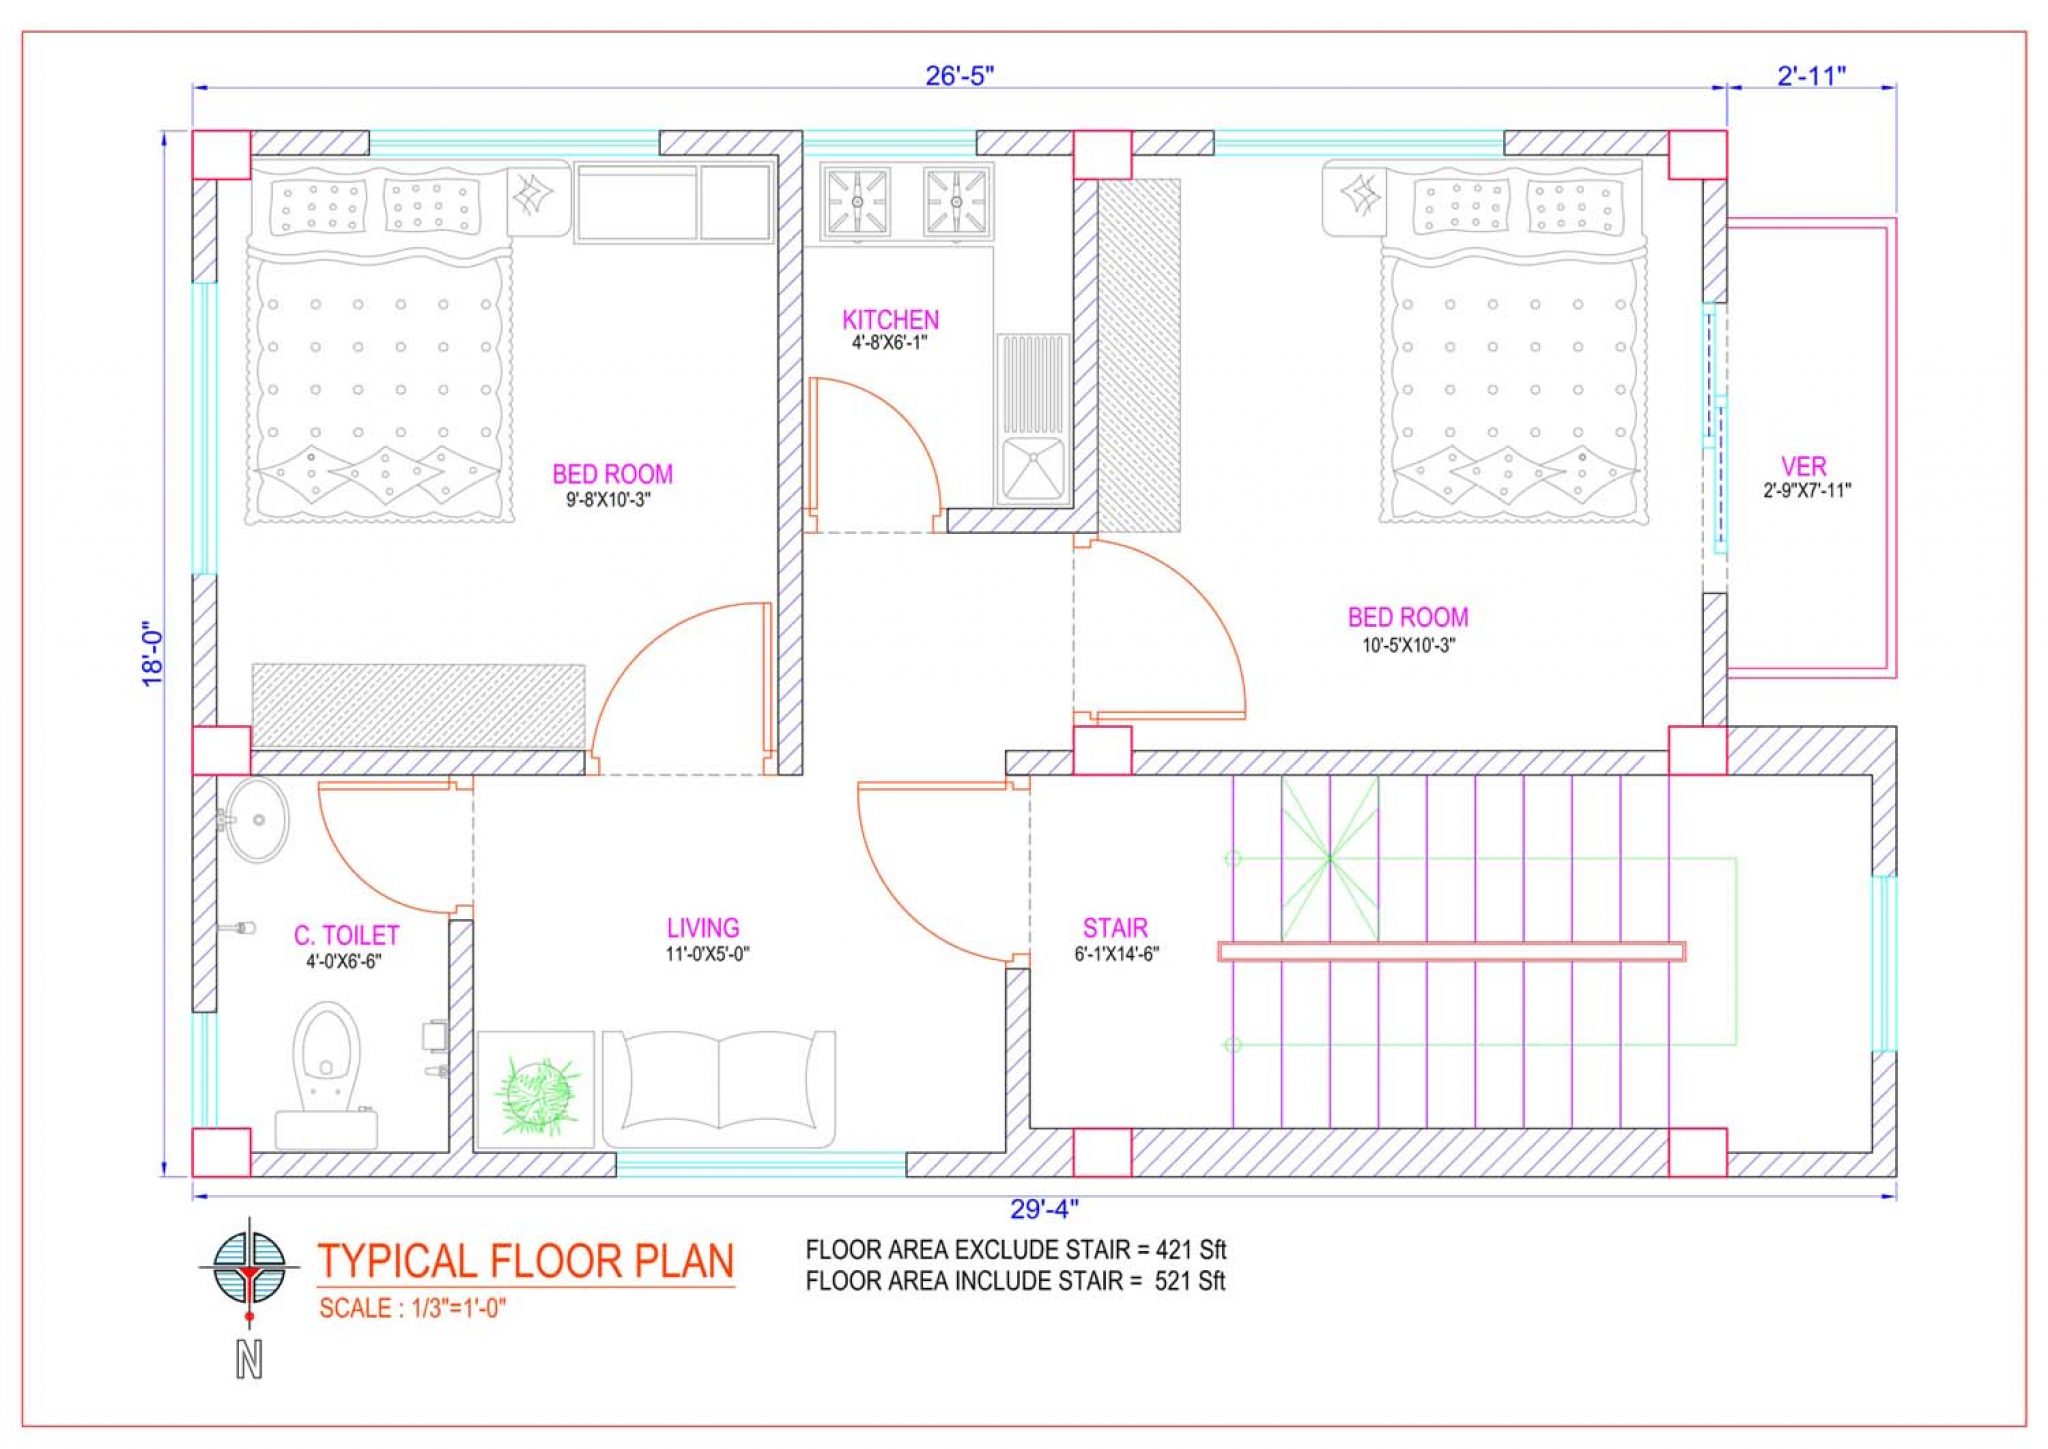 House Plan Images Free Download